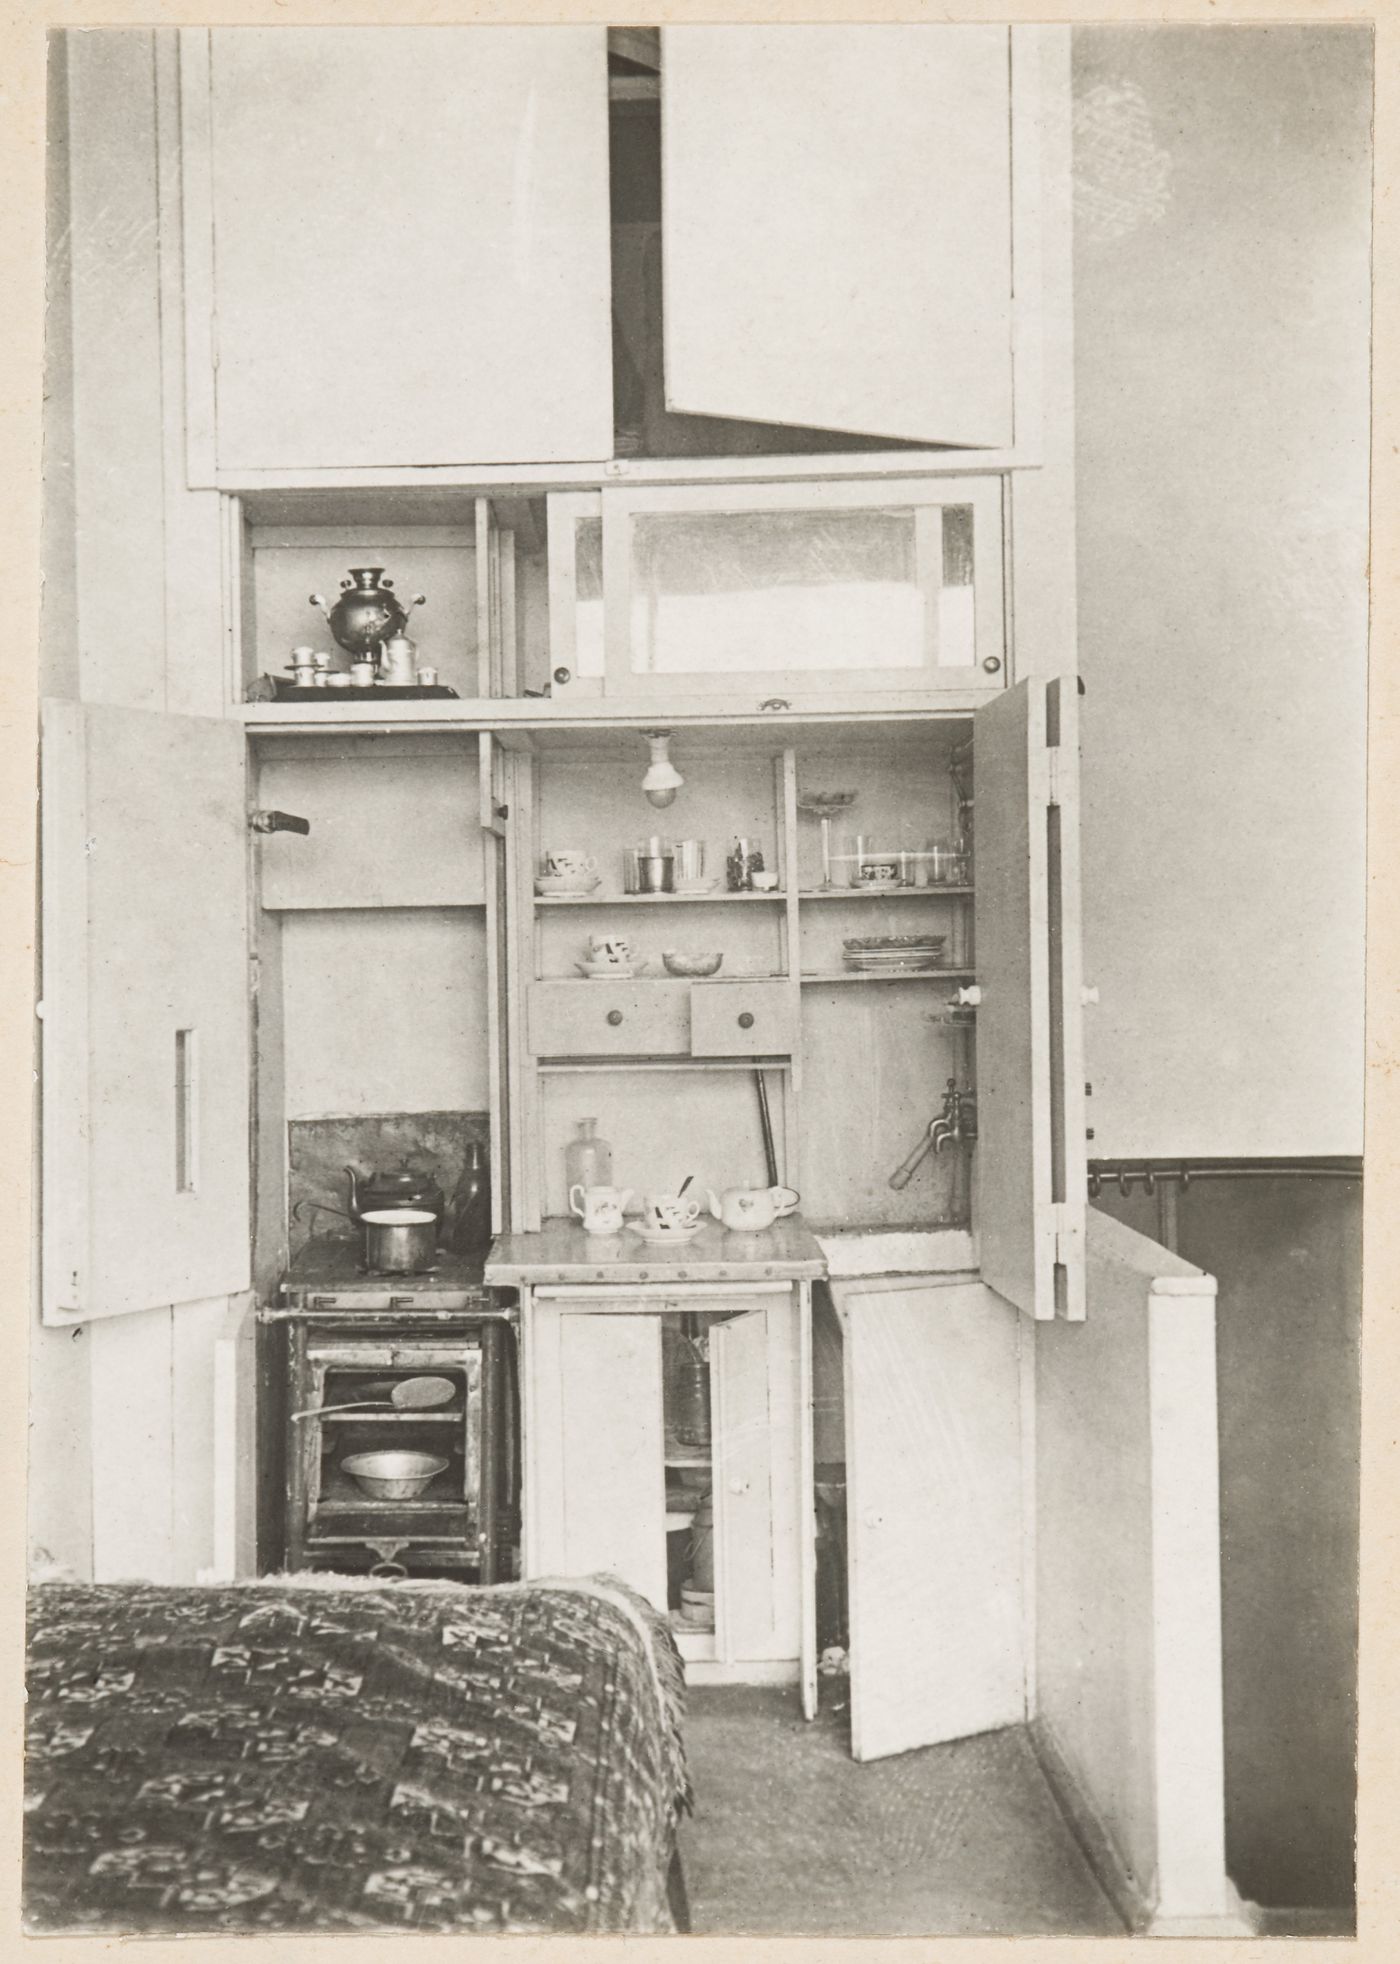 Interior view of a Type F unit apartment showing a built-in kitchen, 8 Gogolevskii Boulevard, Moscow, USSR